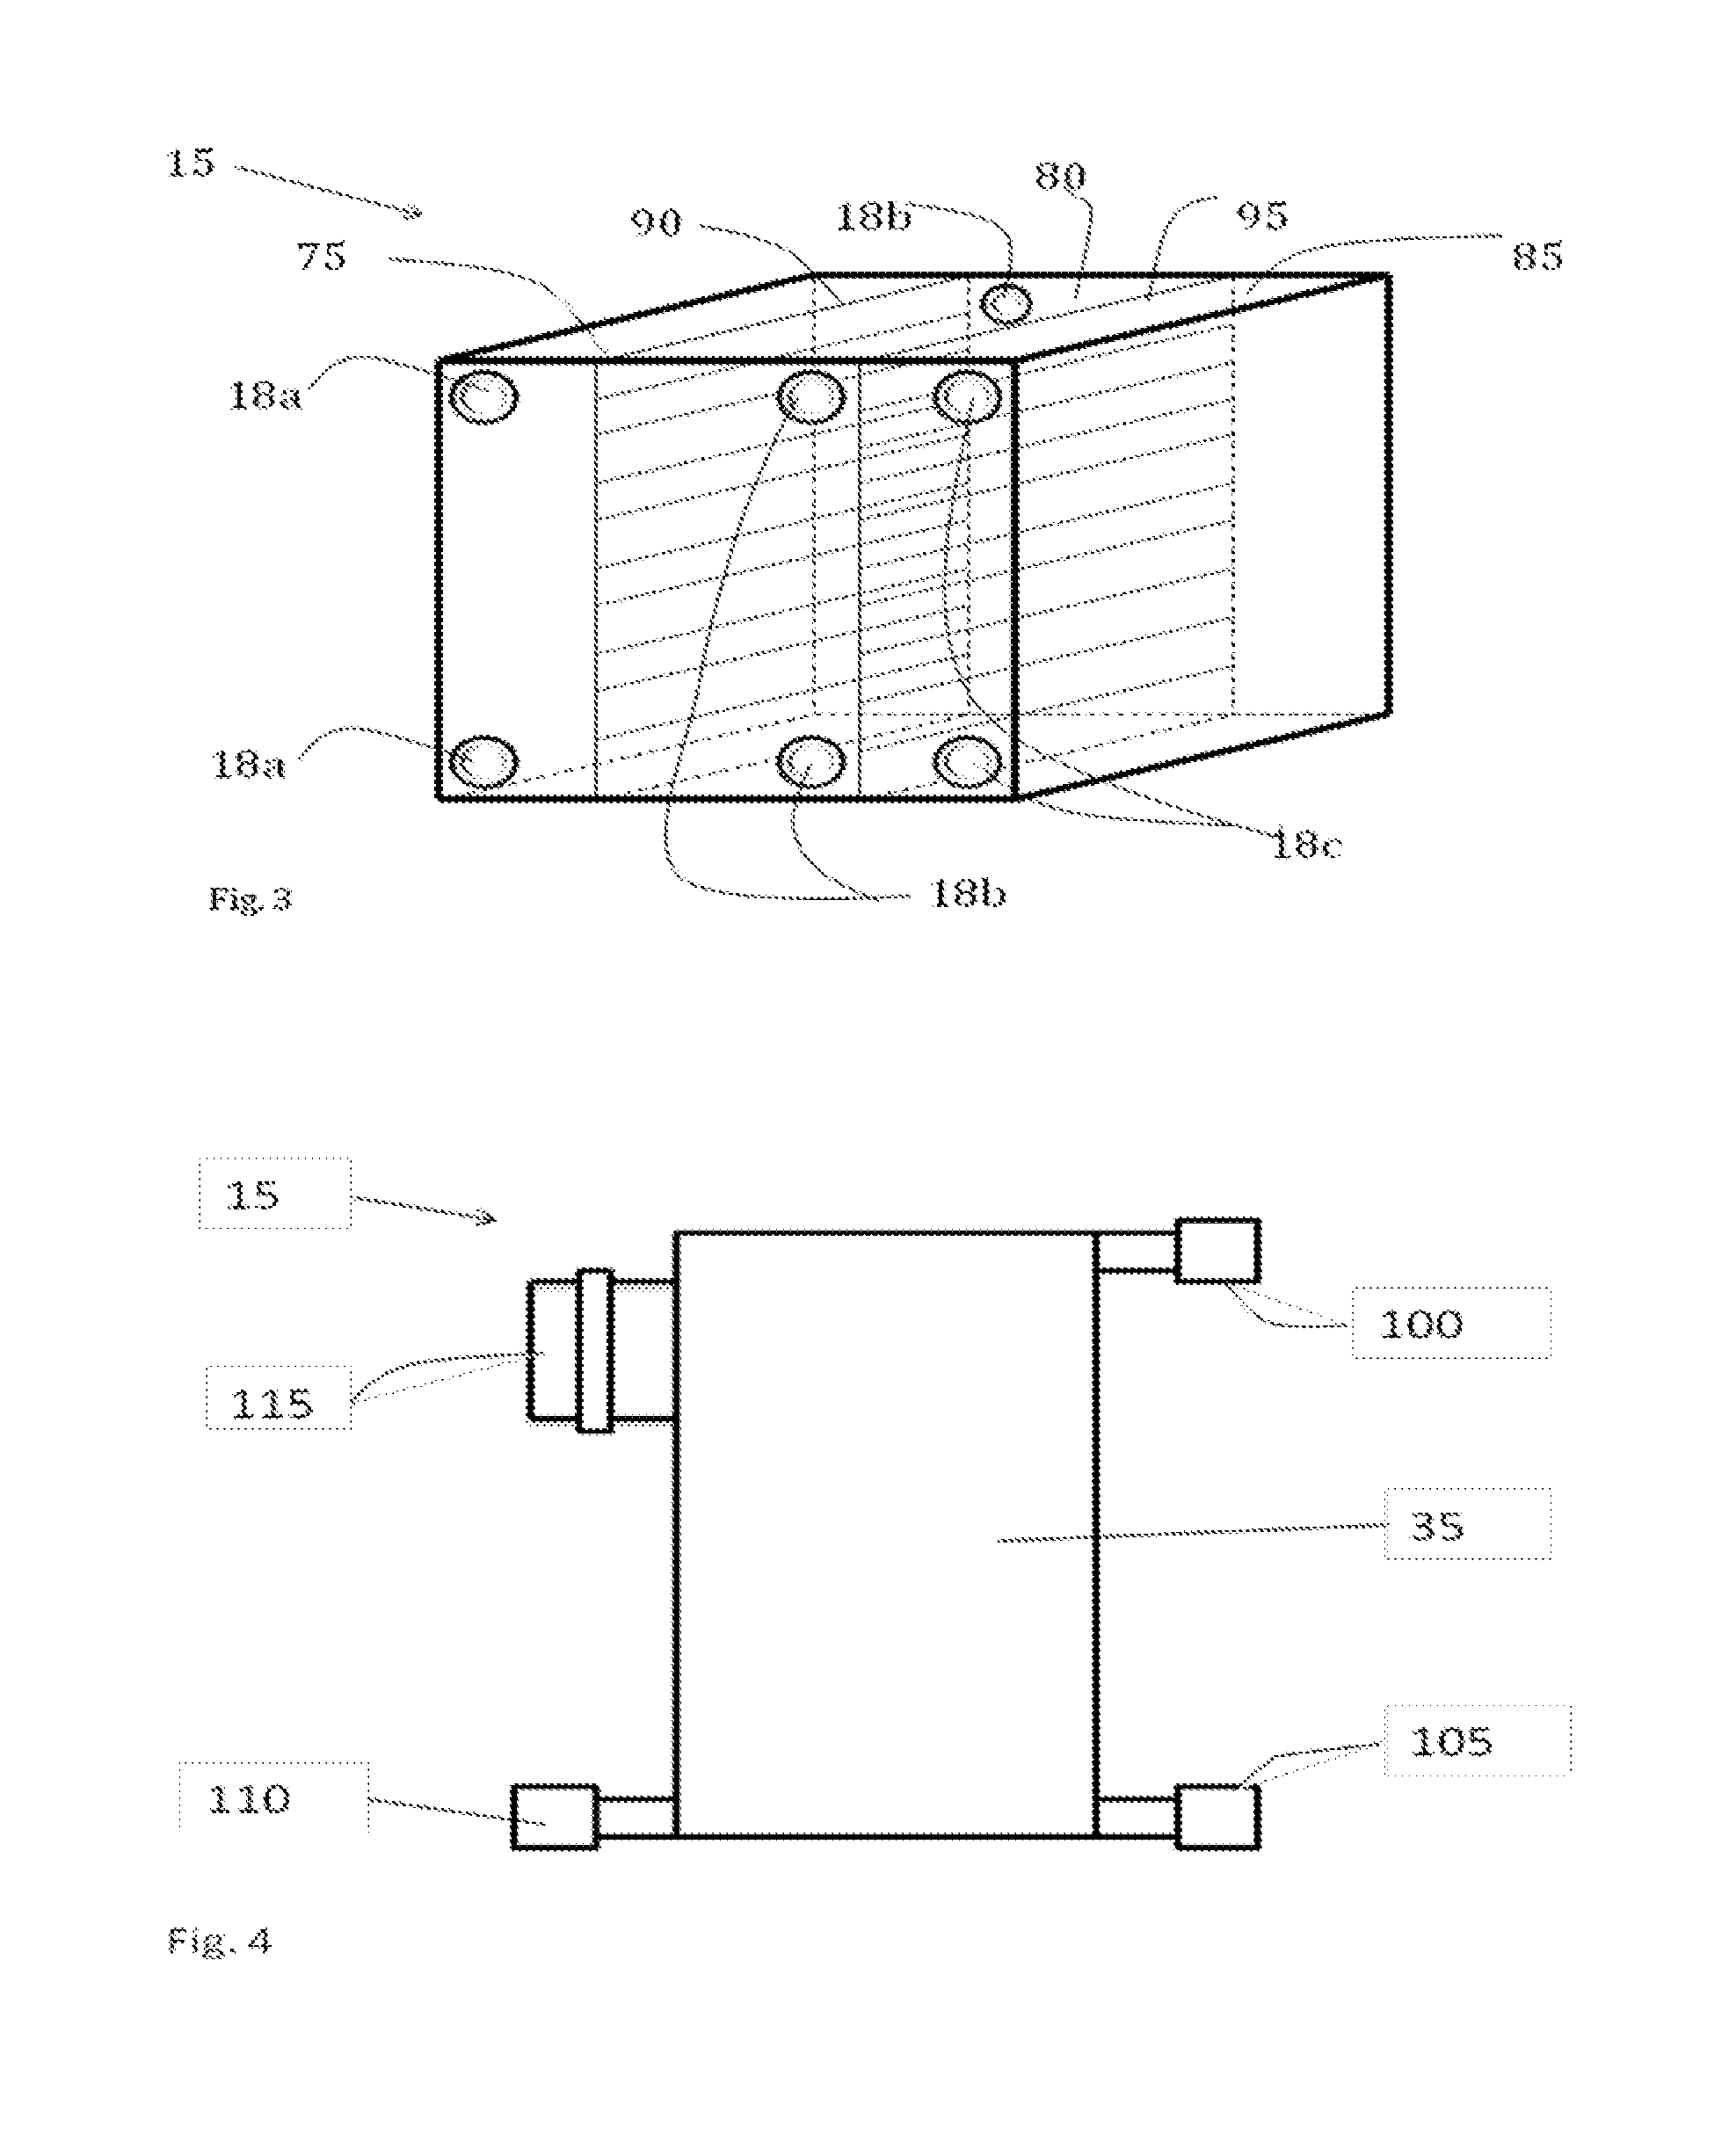 Multifunctional Bioreactor system and methods for cell sorting and culturing